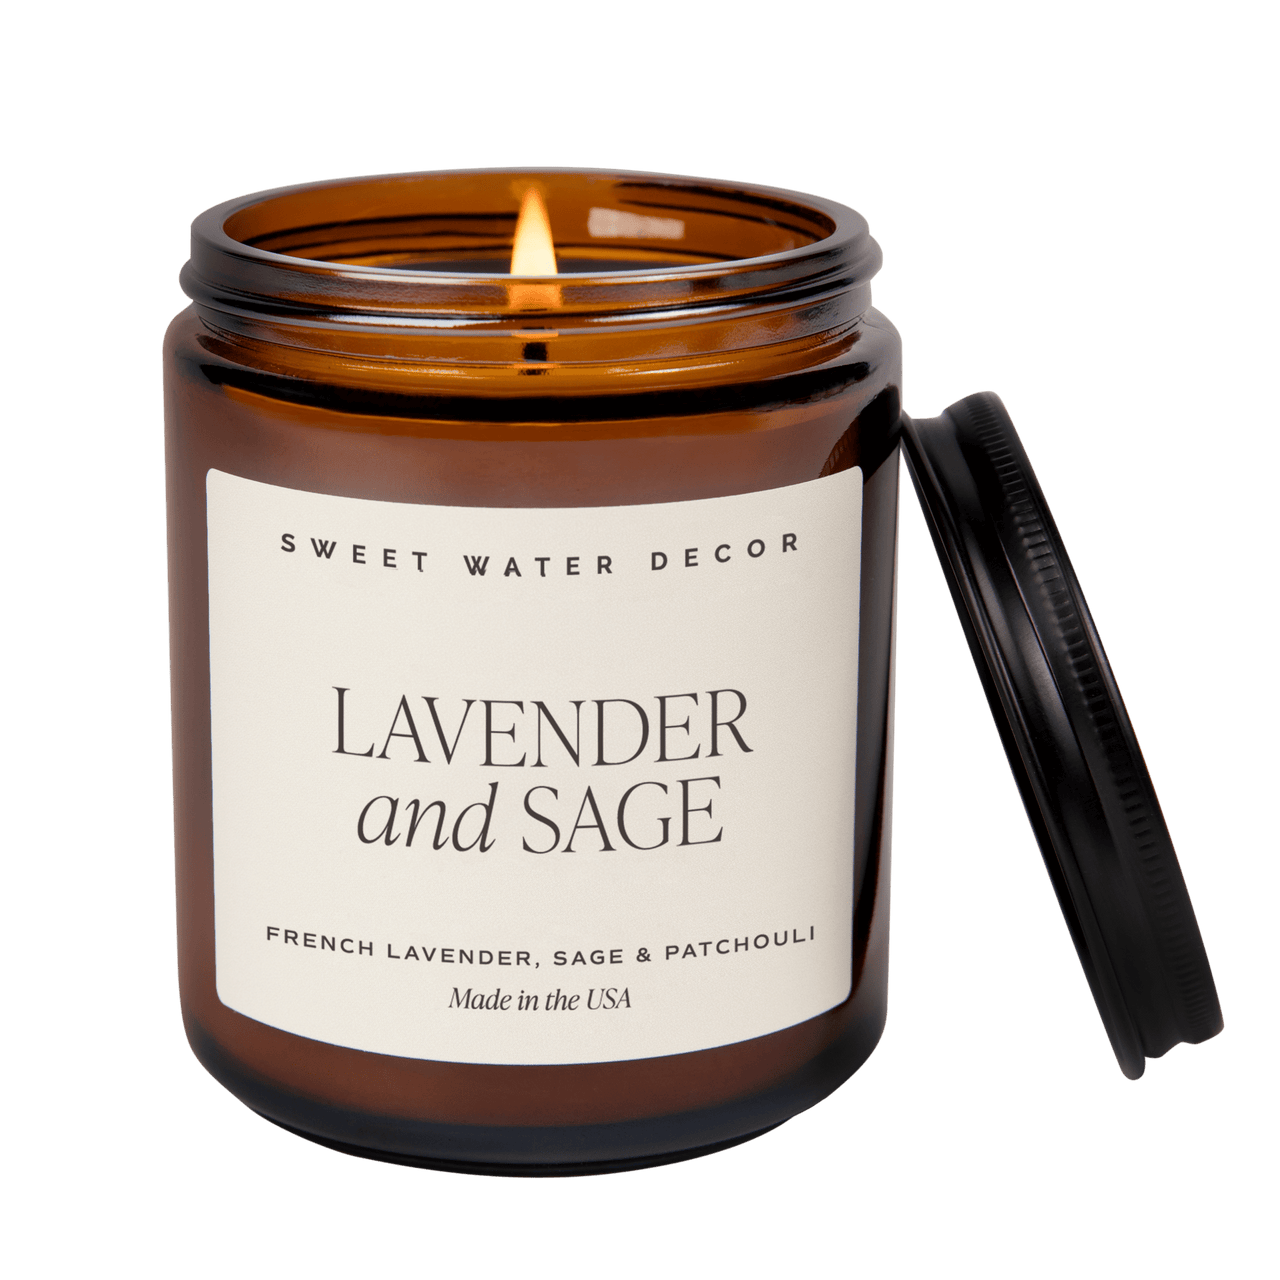 Lavender and Sage Soy Candle - Amber Jar - 9 oz - Tony's Home Furnishings